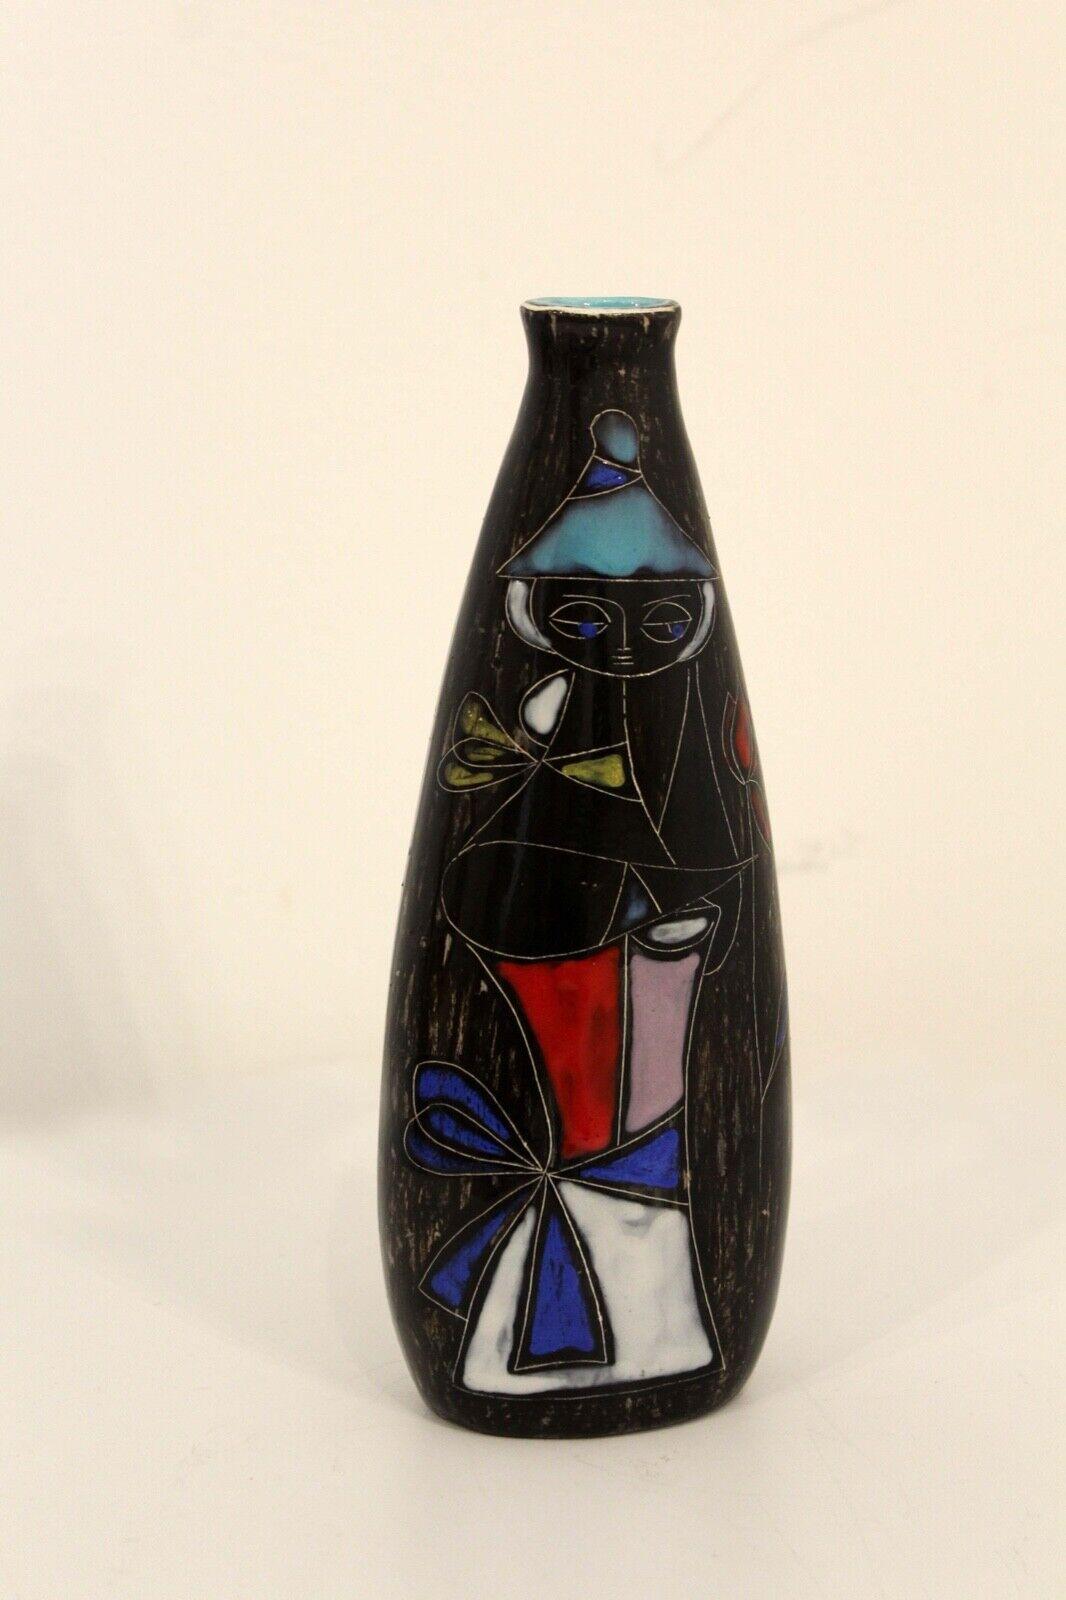 For your consideration is this iconic mid century studio ceramic vase made and signed by Marcello Fantoni. Dimensions: 3w x 2d x 8.25h.
 